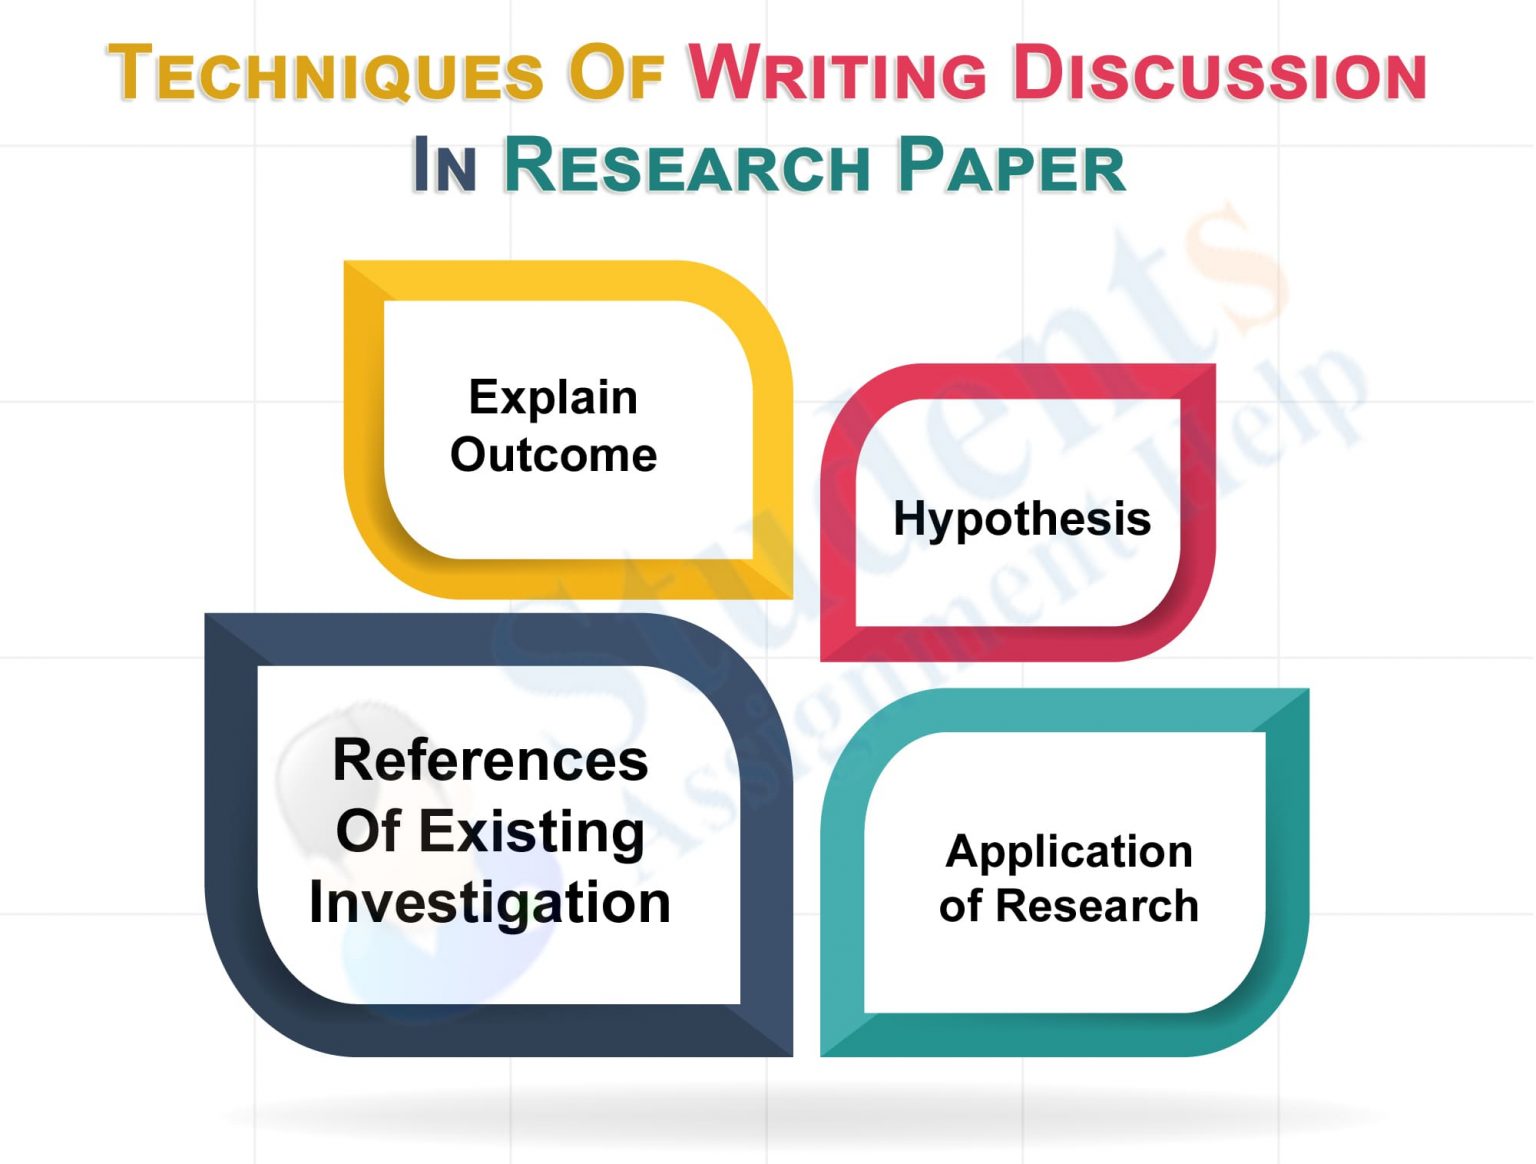 function of discussion in research paper